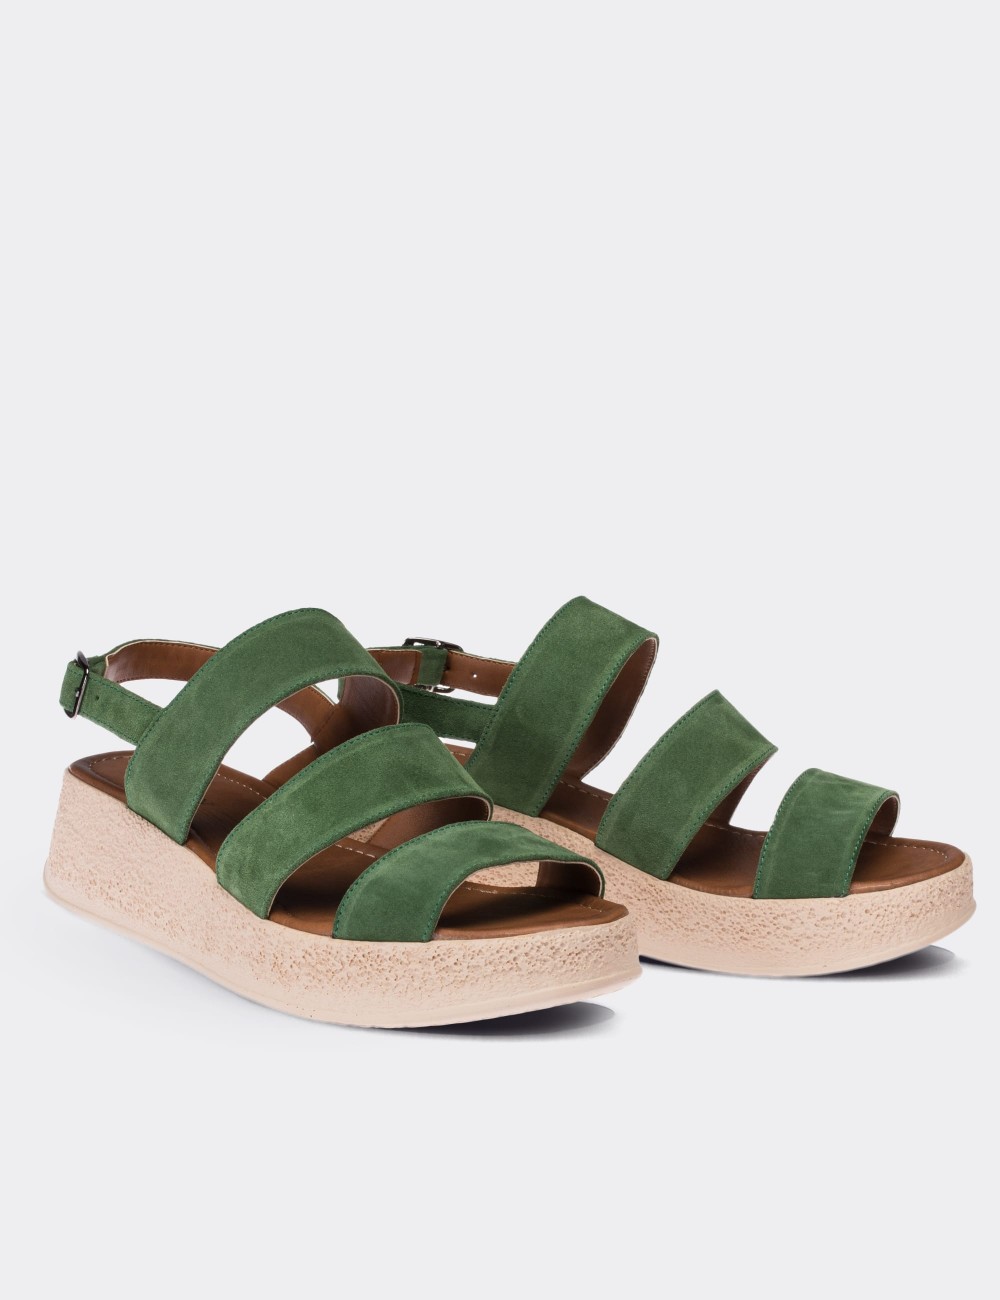 Green Suede Leather Sandals - Deery